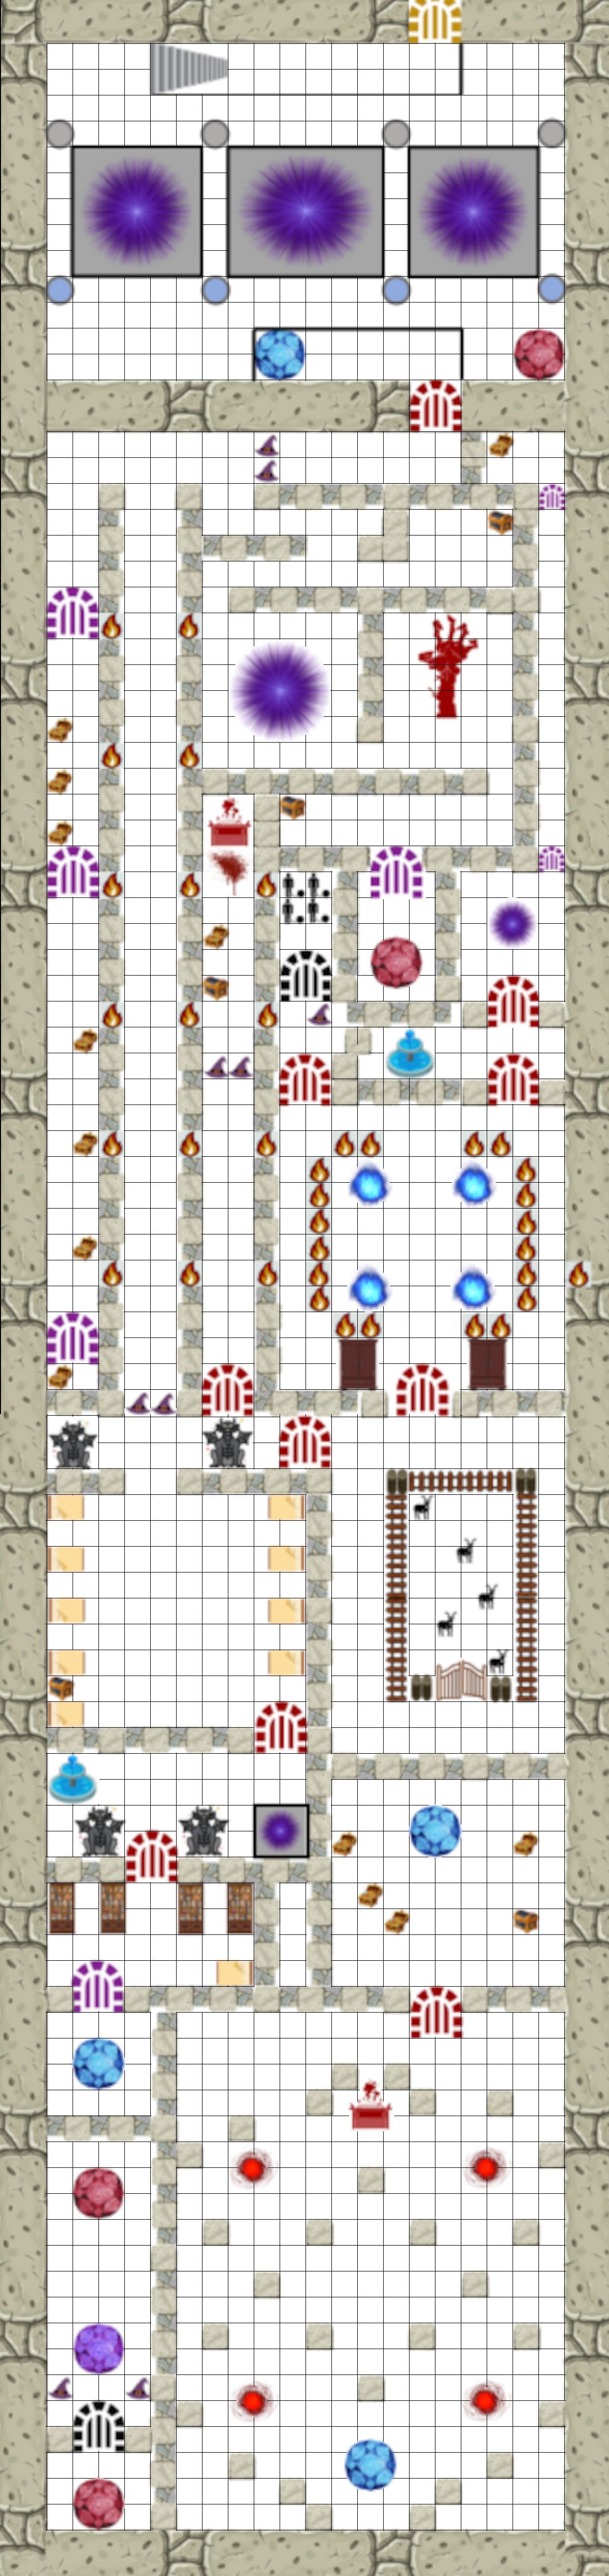 Dungeon A Day Crypt of the Plaguebringers Complete Map